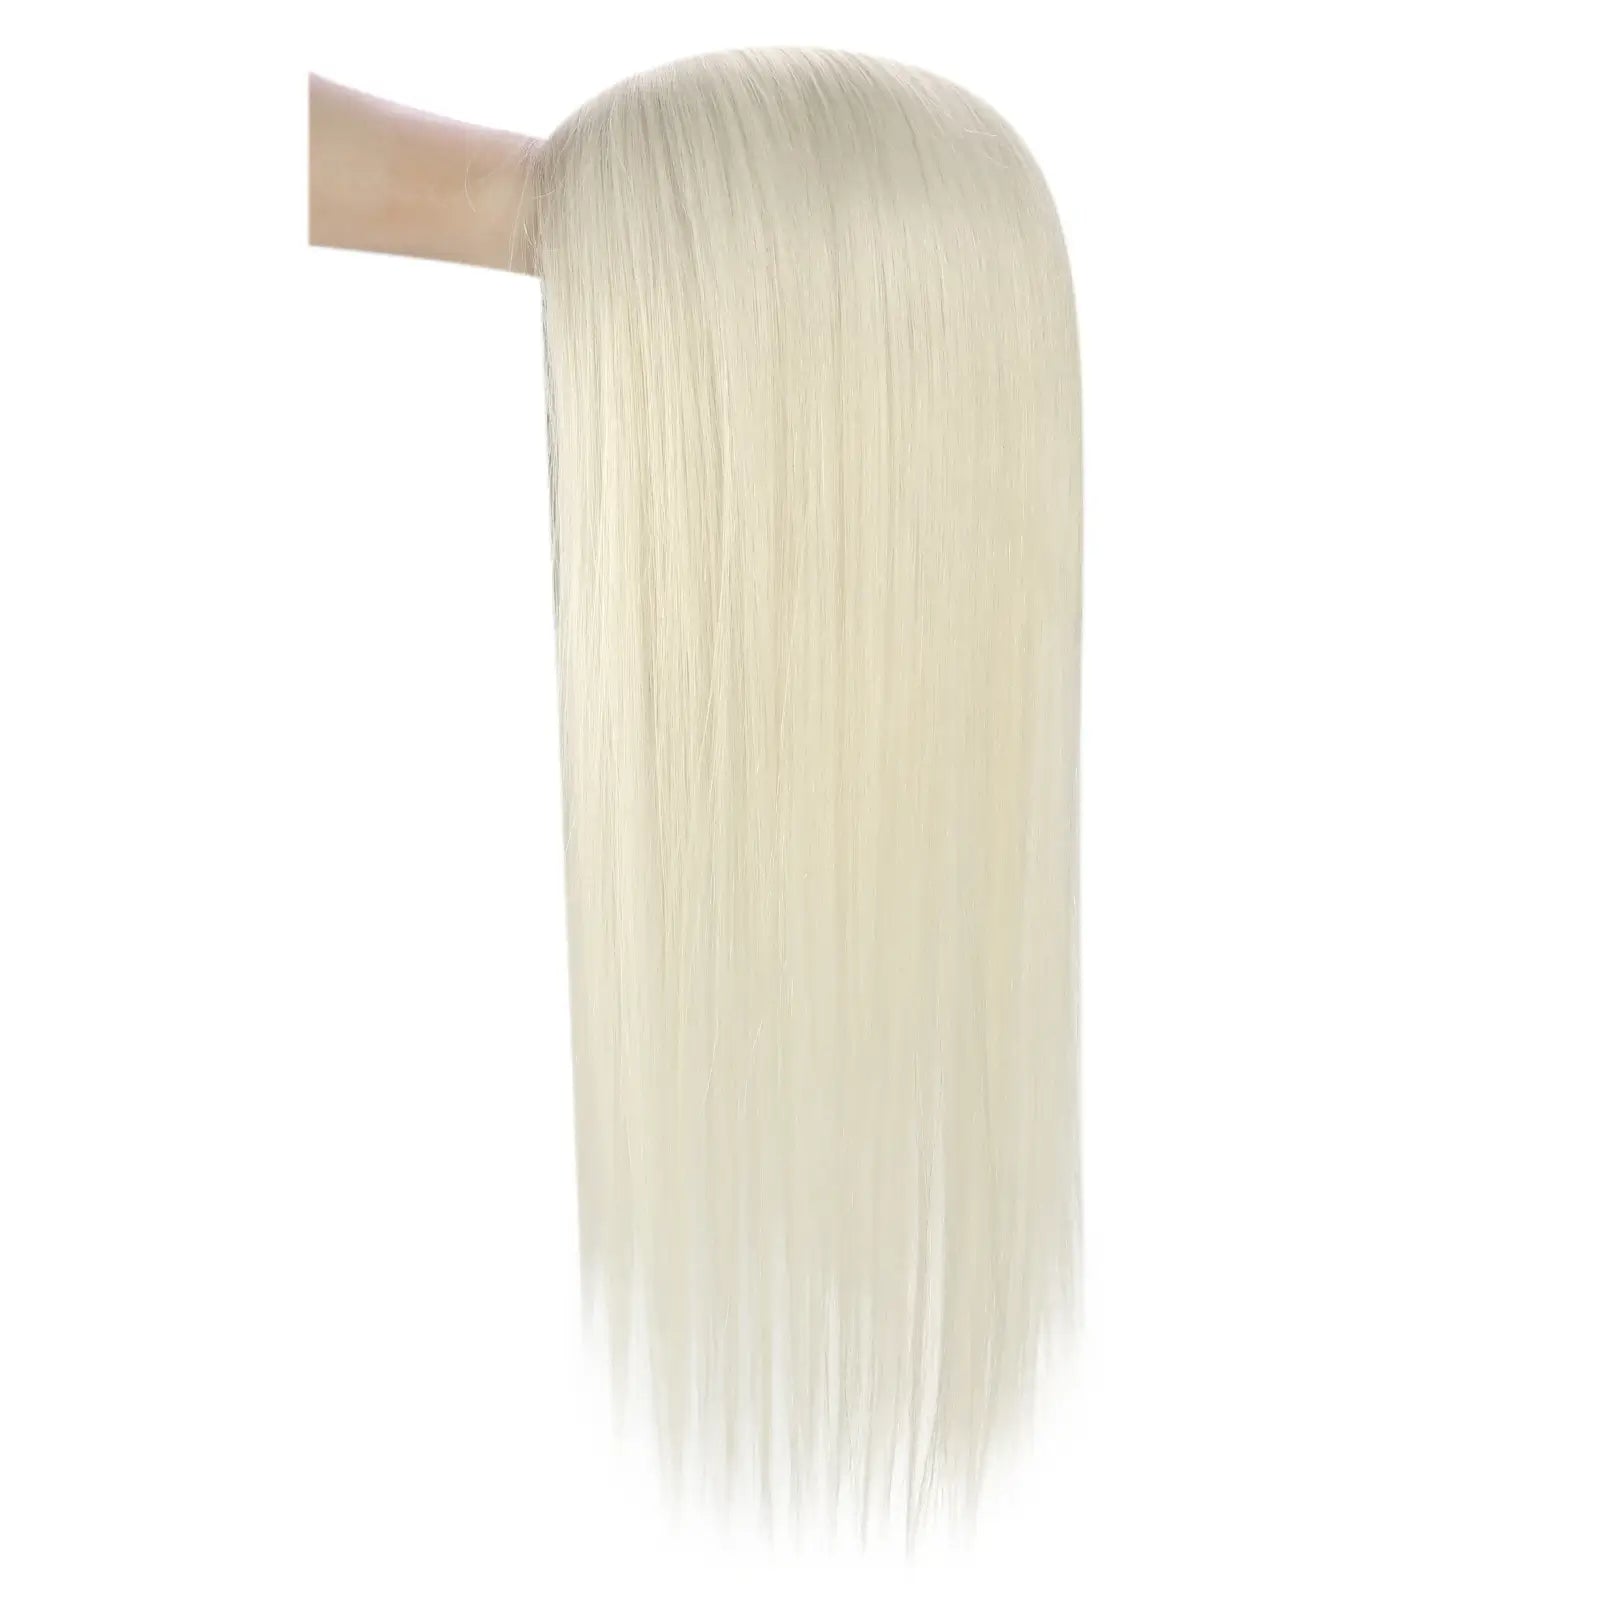 Mono Base Real Human Hair Platinum Blonde HairPiece Toppers for Women